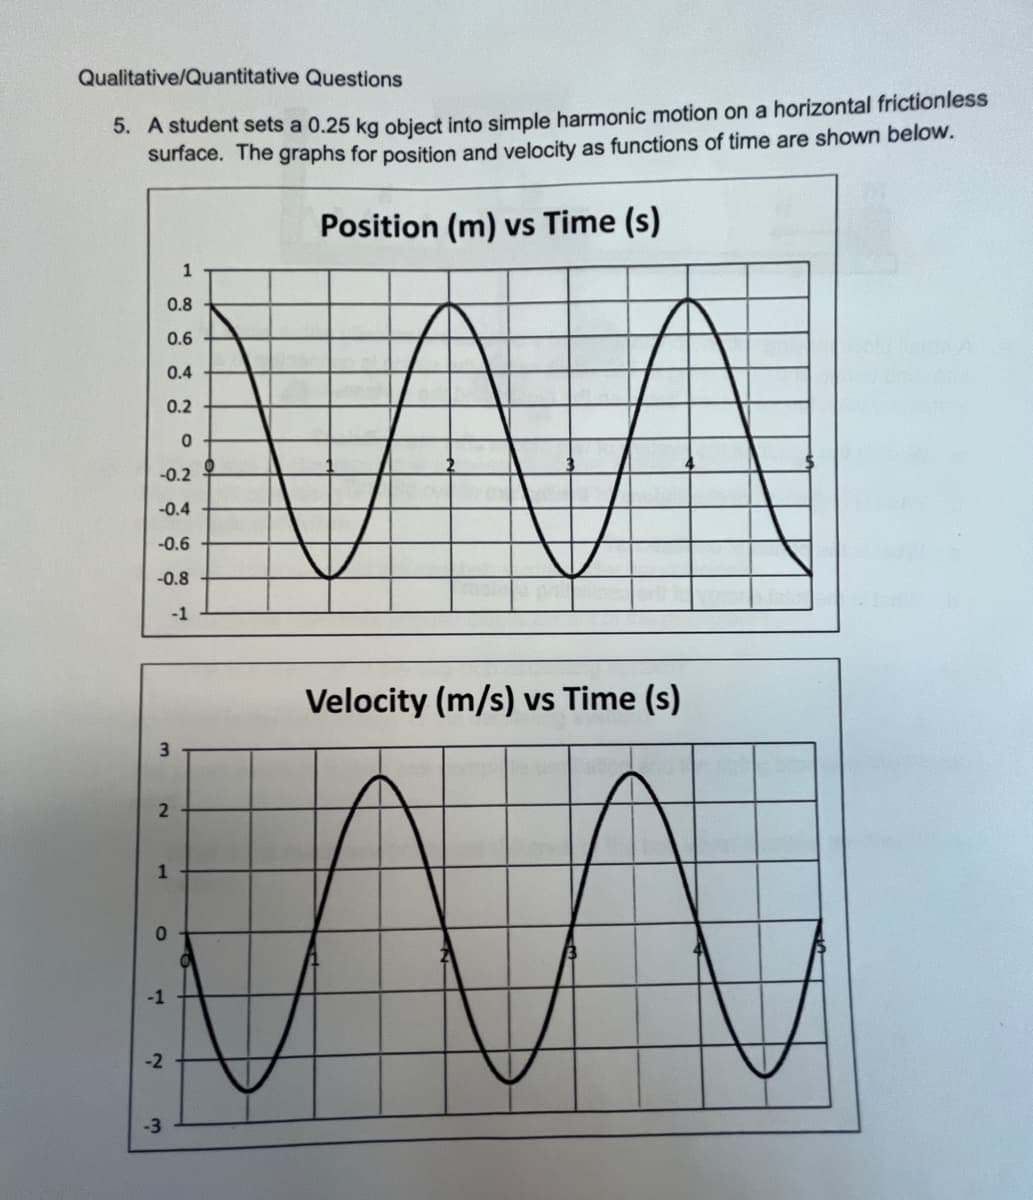 Qualitative/Quantitative Questions
5. A student sets a 0.25 kg object into simple harmonic motion on a horizontal frictionless
surface. The graphs for position and velocity as functions of time are shown below.
Position (m) vs Time (s)
1
0.8
0.6
0.4
0.2
-0.2
-0.4
-0.6
-0.8
-1
Velocity (m/s) vs Time (s)
3.
1
-1
-2
-3
